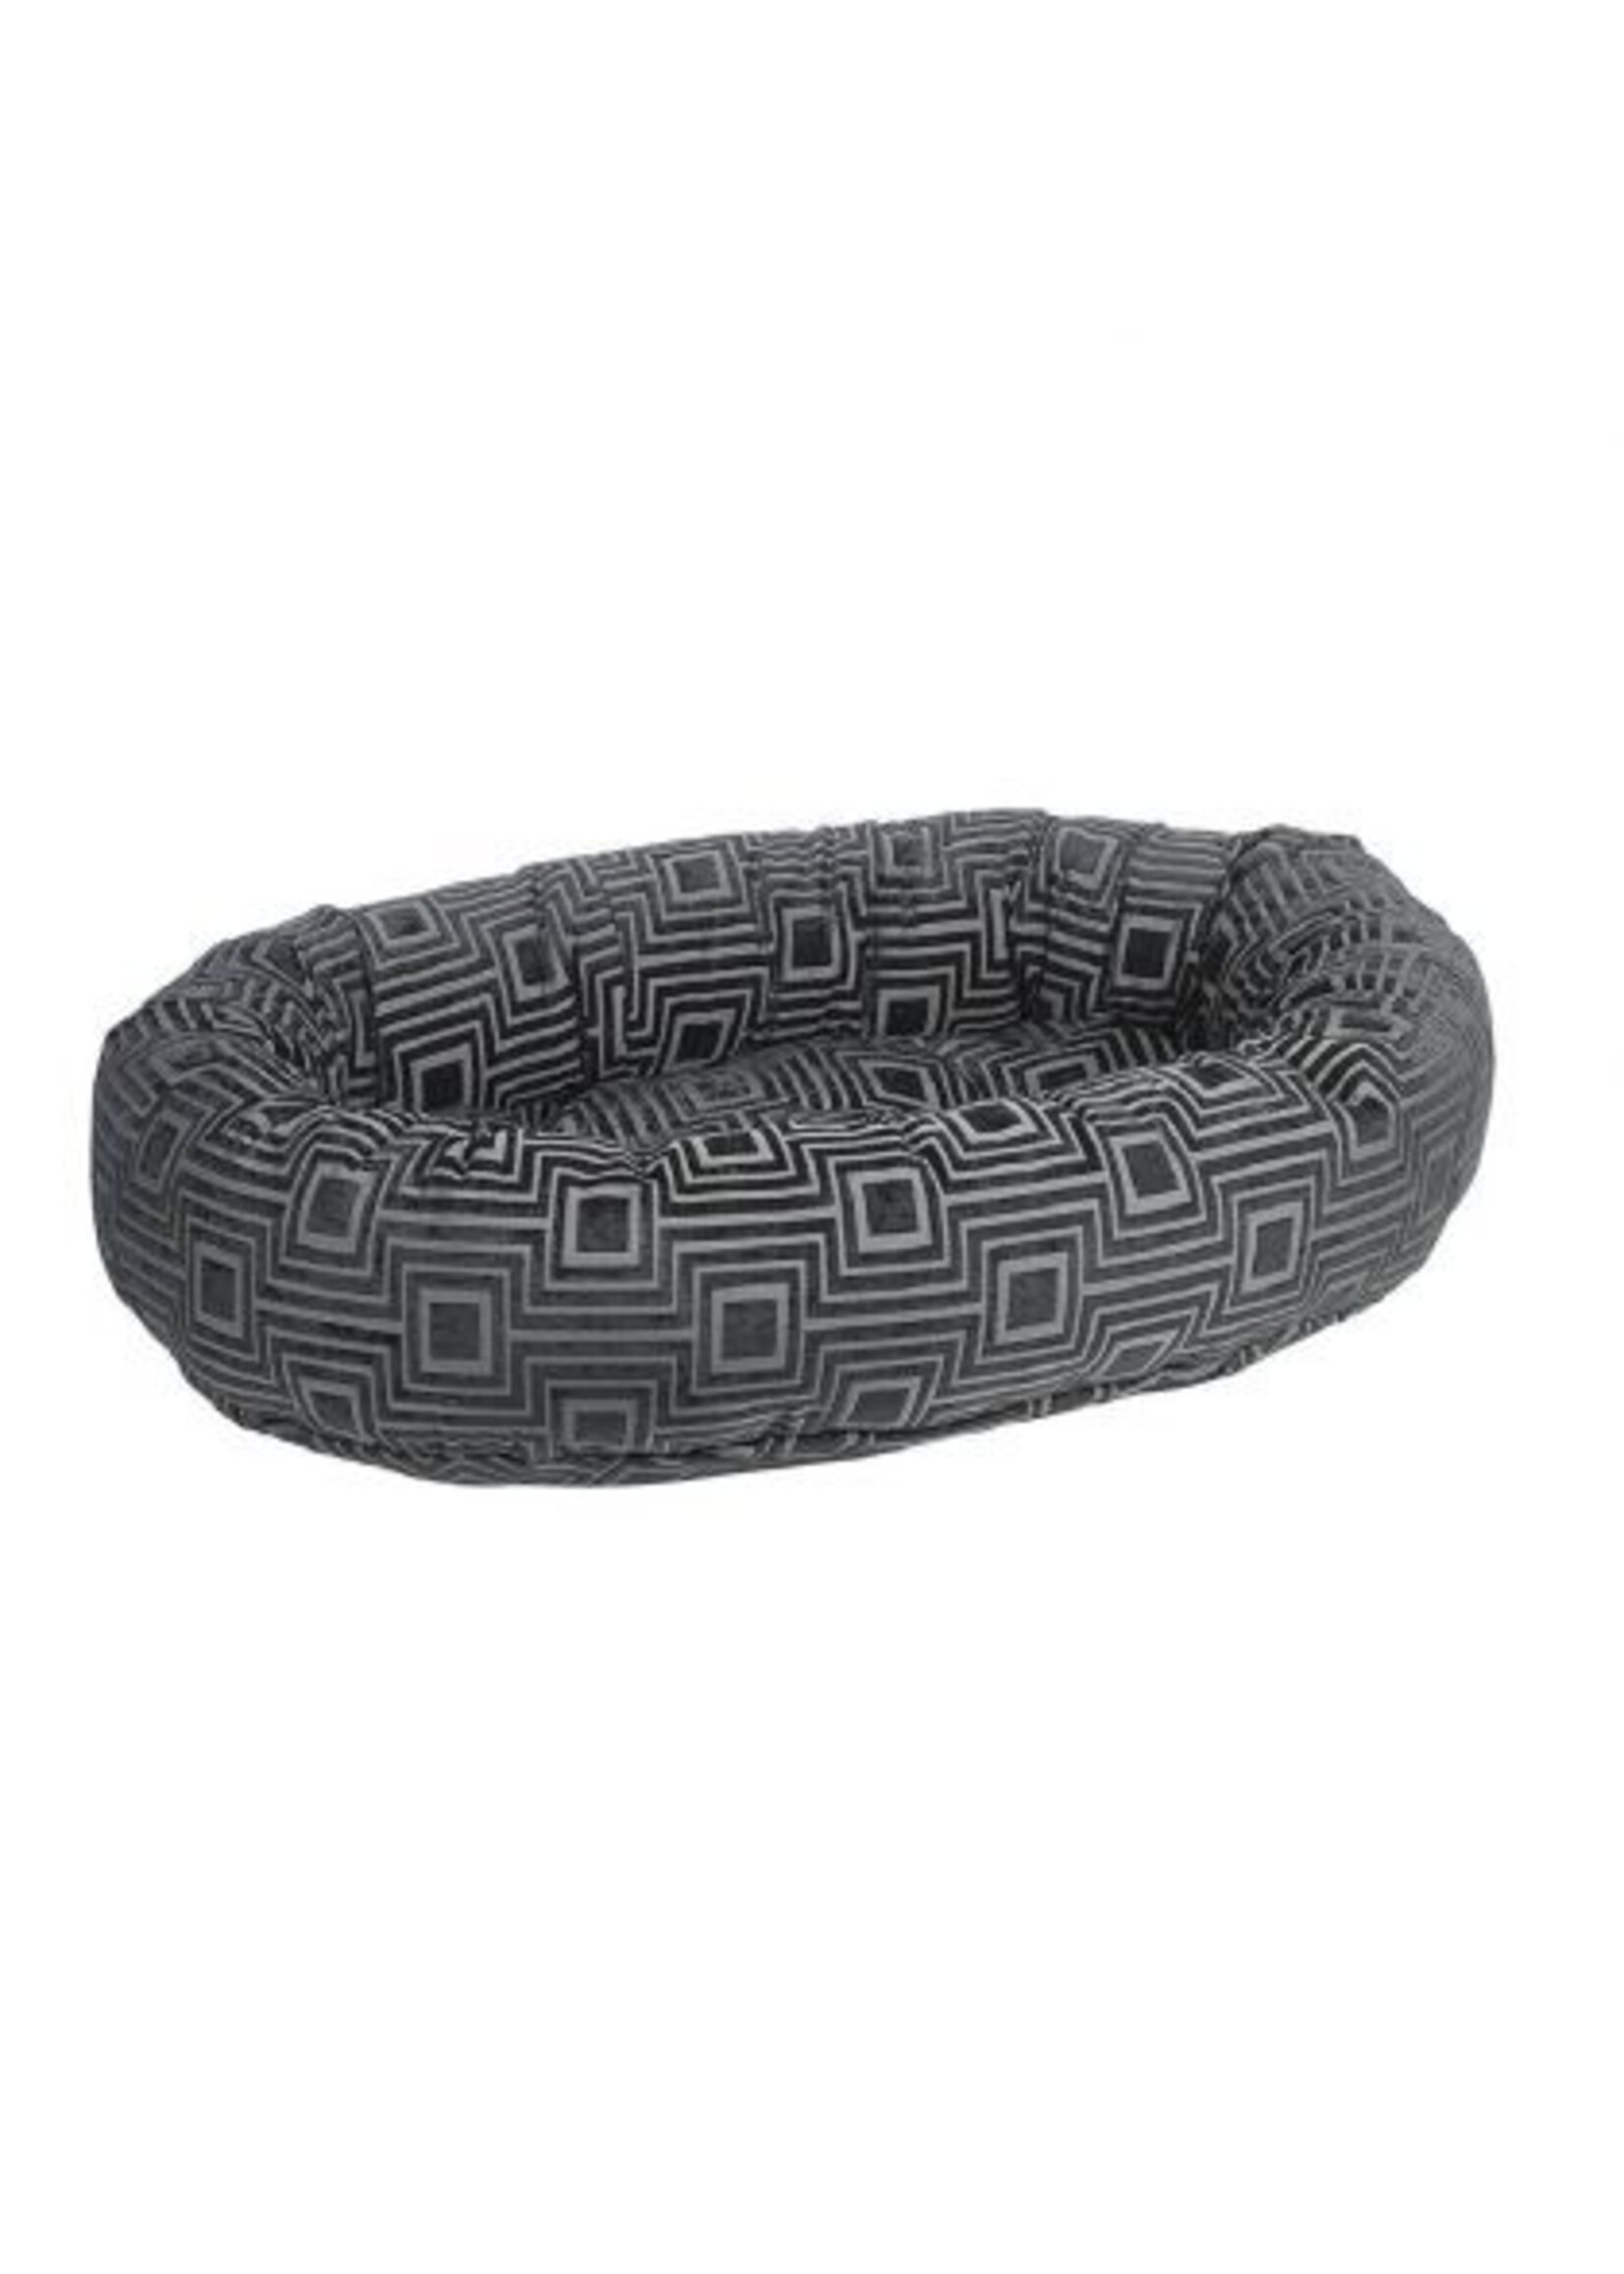 Bowsers Pet Products Bowsers Pet Donut Bed Microvelvet